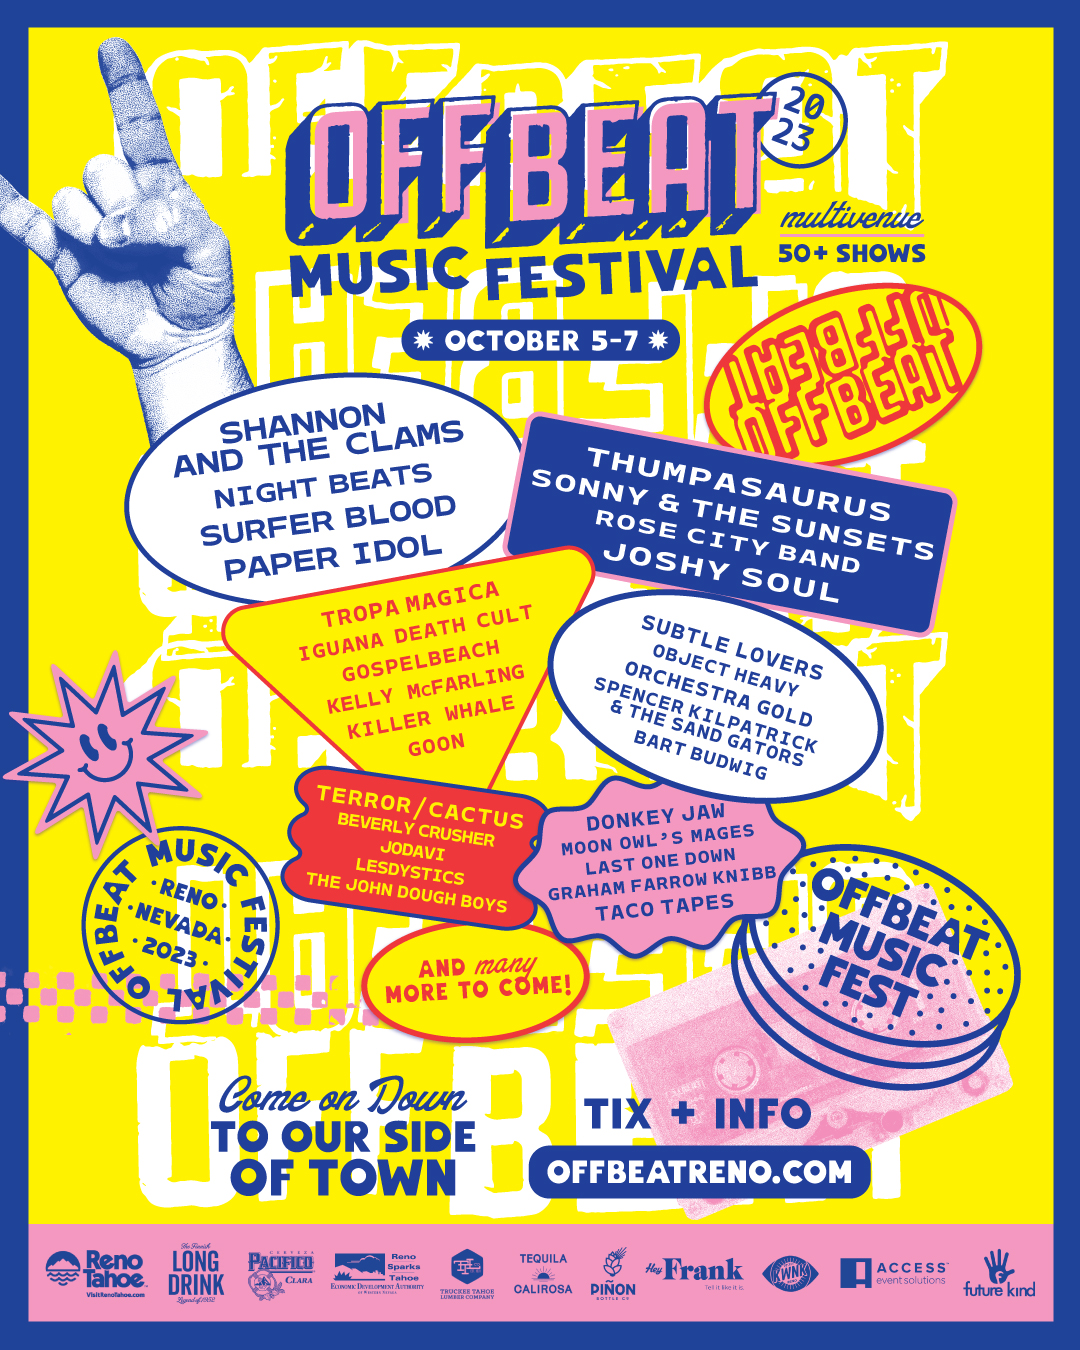 Off Beat Music Festival lineup poster